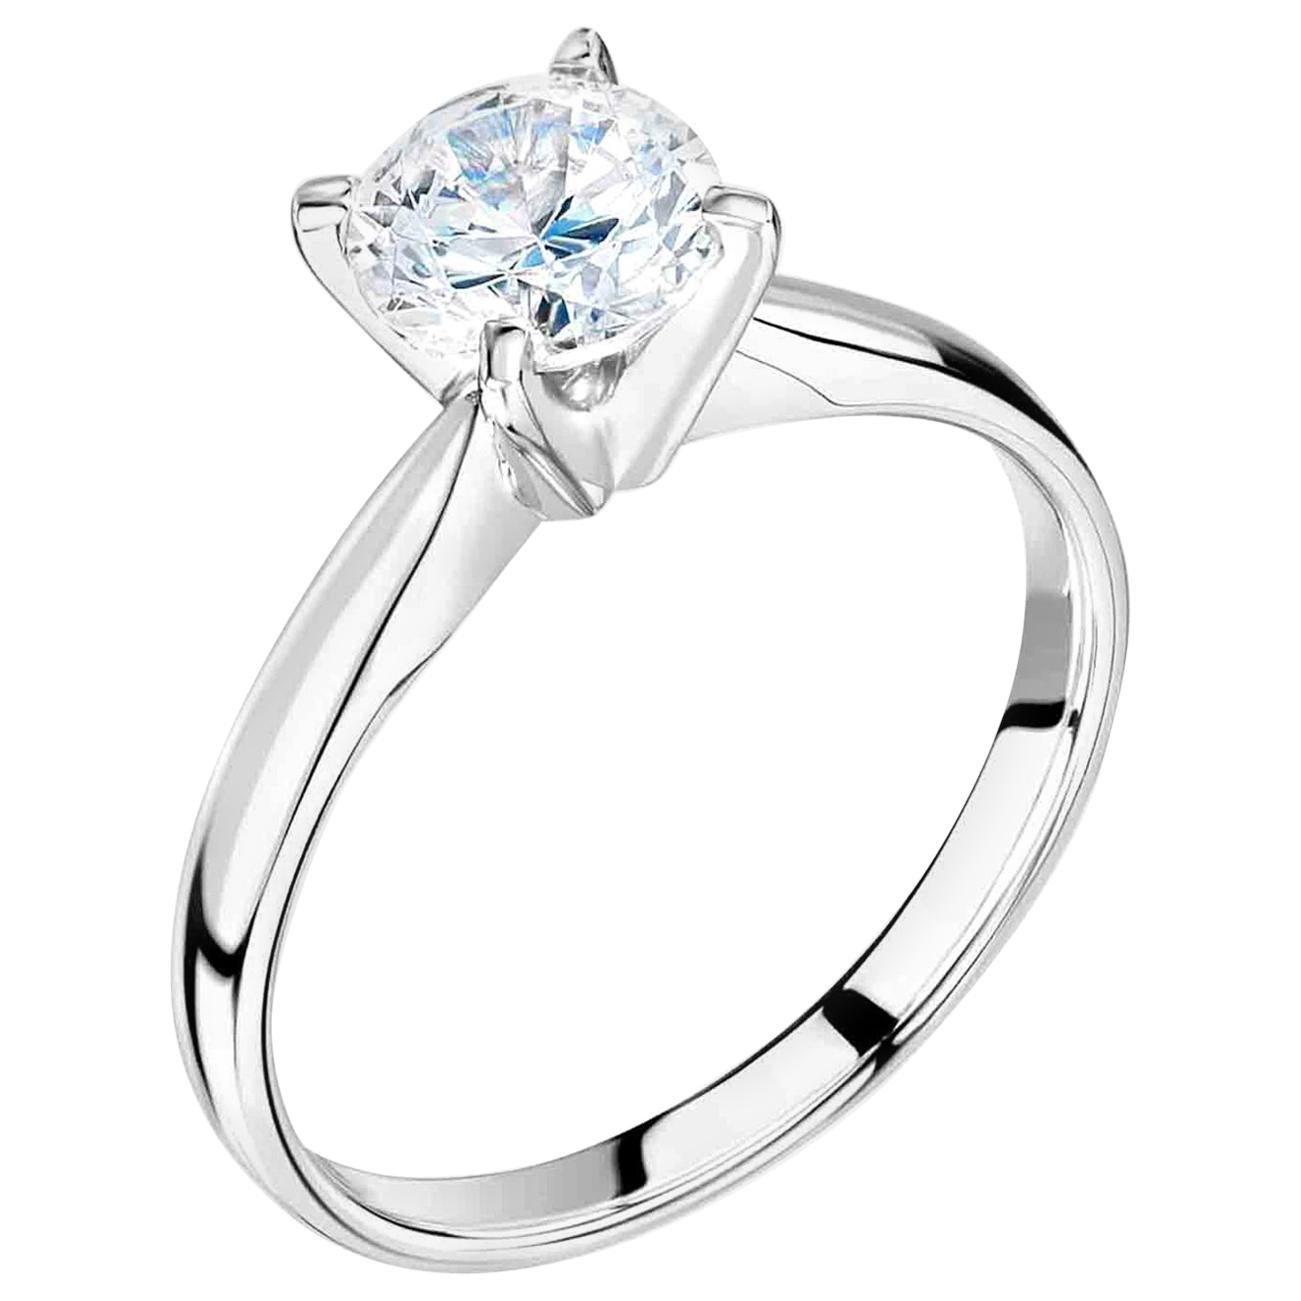 1 Carat, Round Cut 'Wedfit' Diamond Wedding Ring and Engagement Ring Combination For Sale